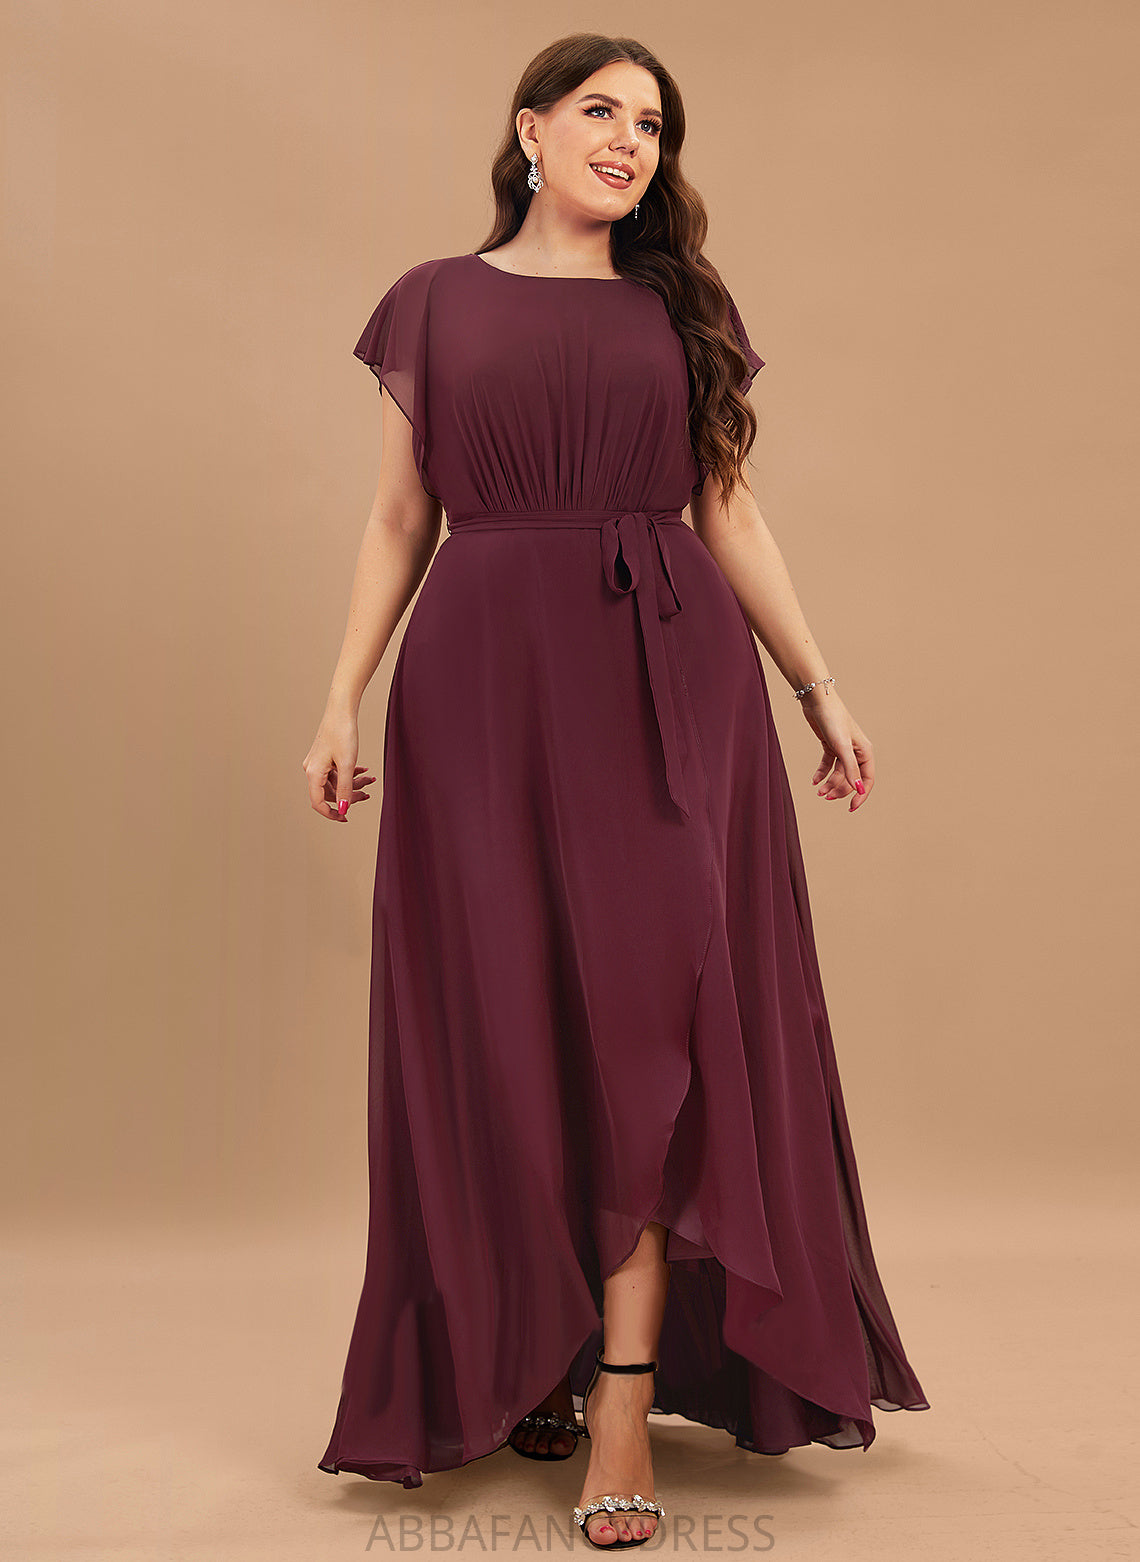 Neck Asymmetrical Elaina Prom Dresses With Ruffle Scoop A-Line